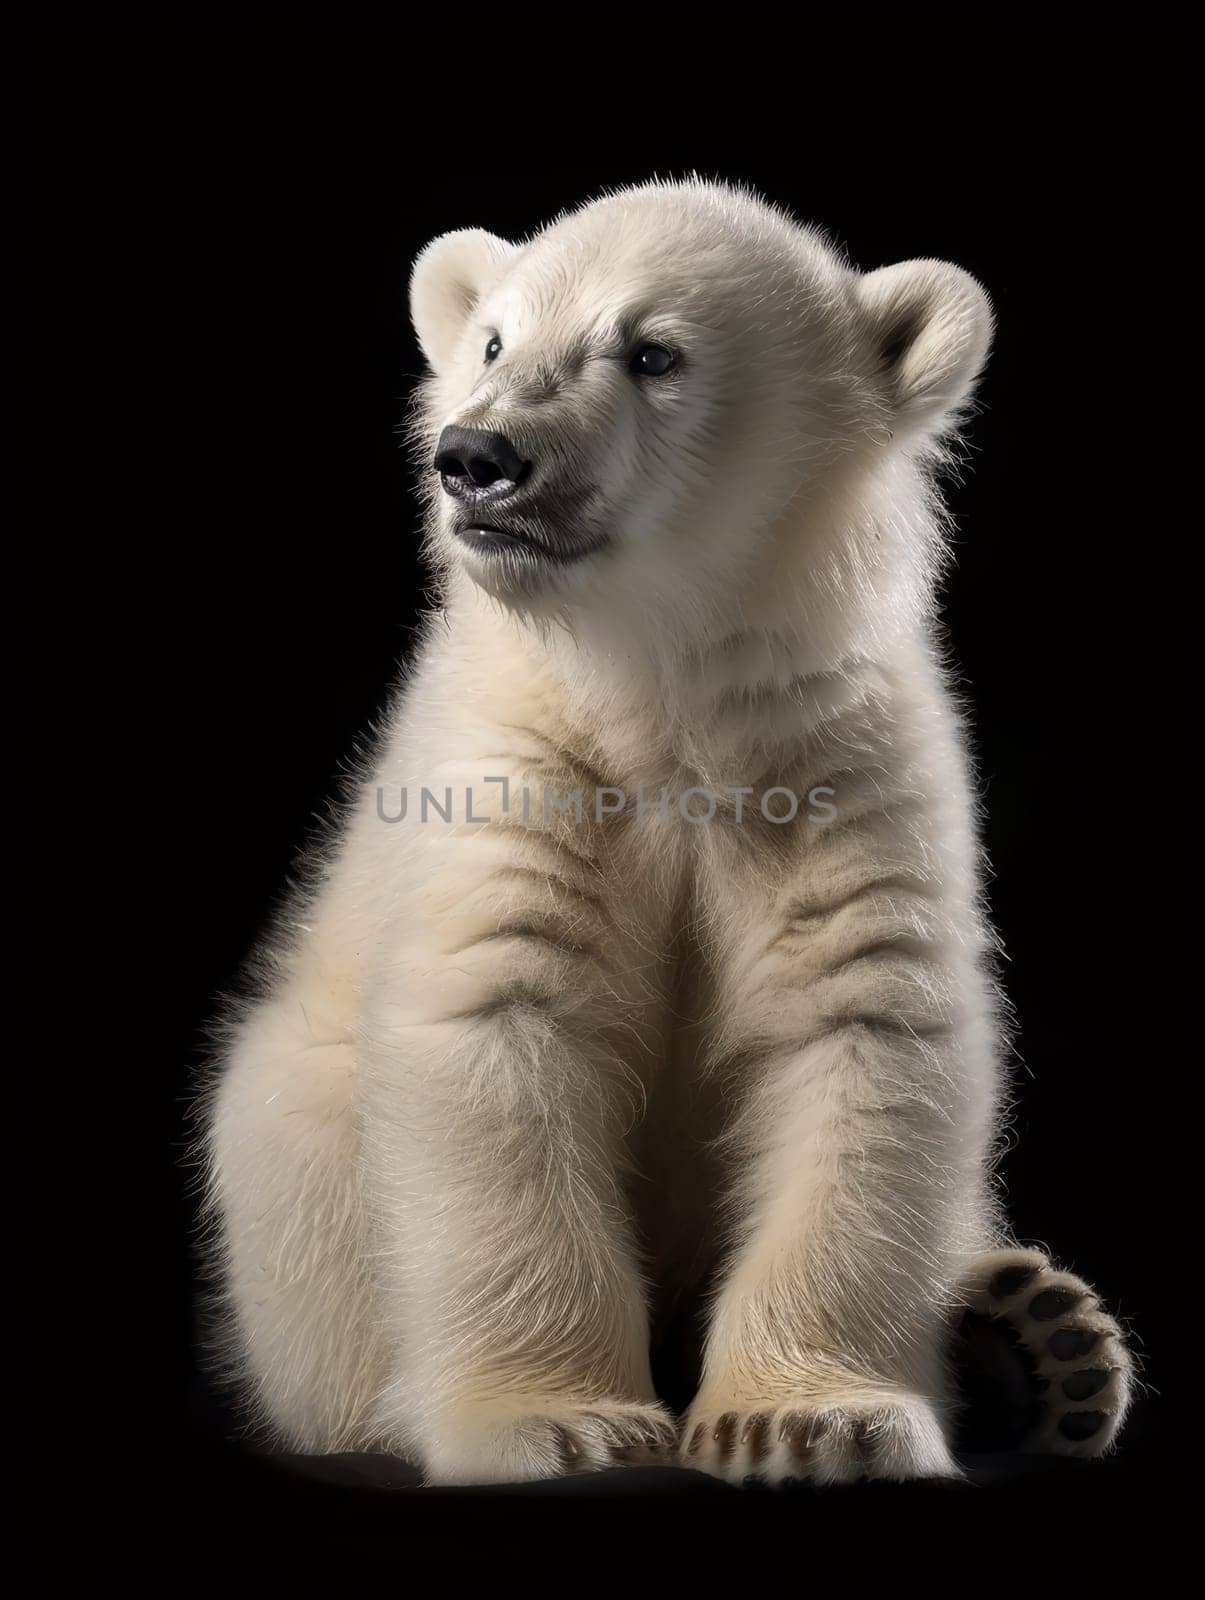 A polar bear cub sits against a dark background, its white fur glowing softly as it looks curiously towards the viewer, embodying vulnerability and the need for conservation.. by sfinks